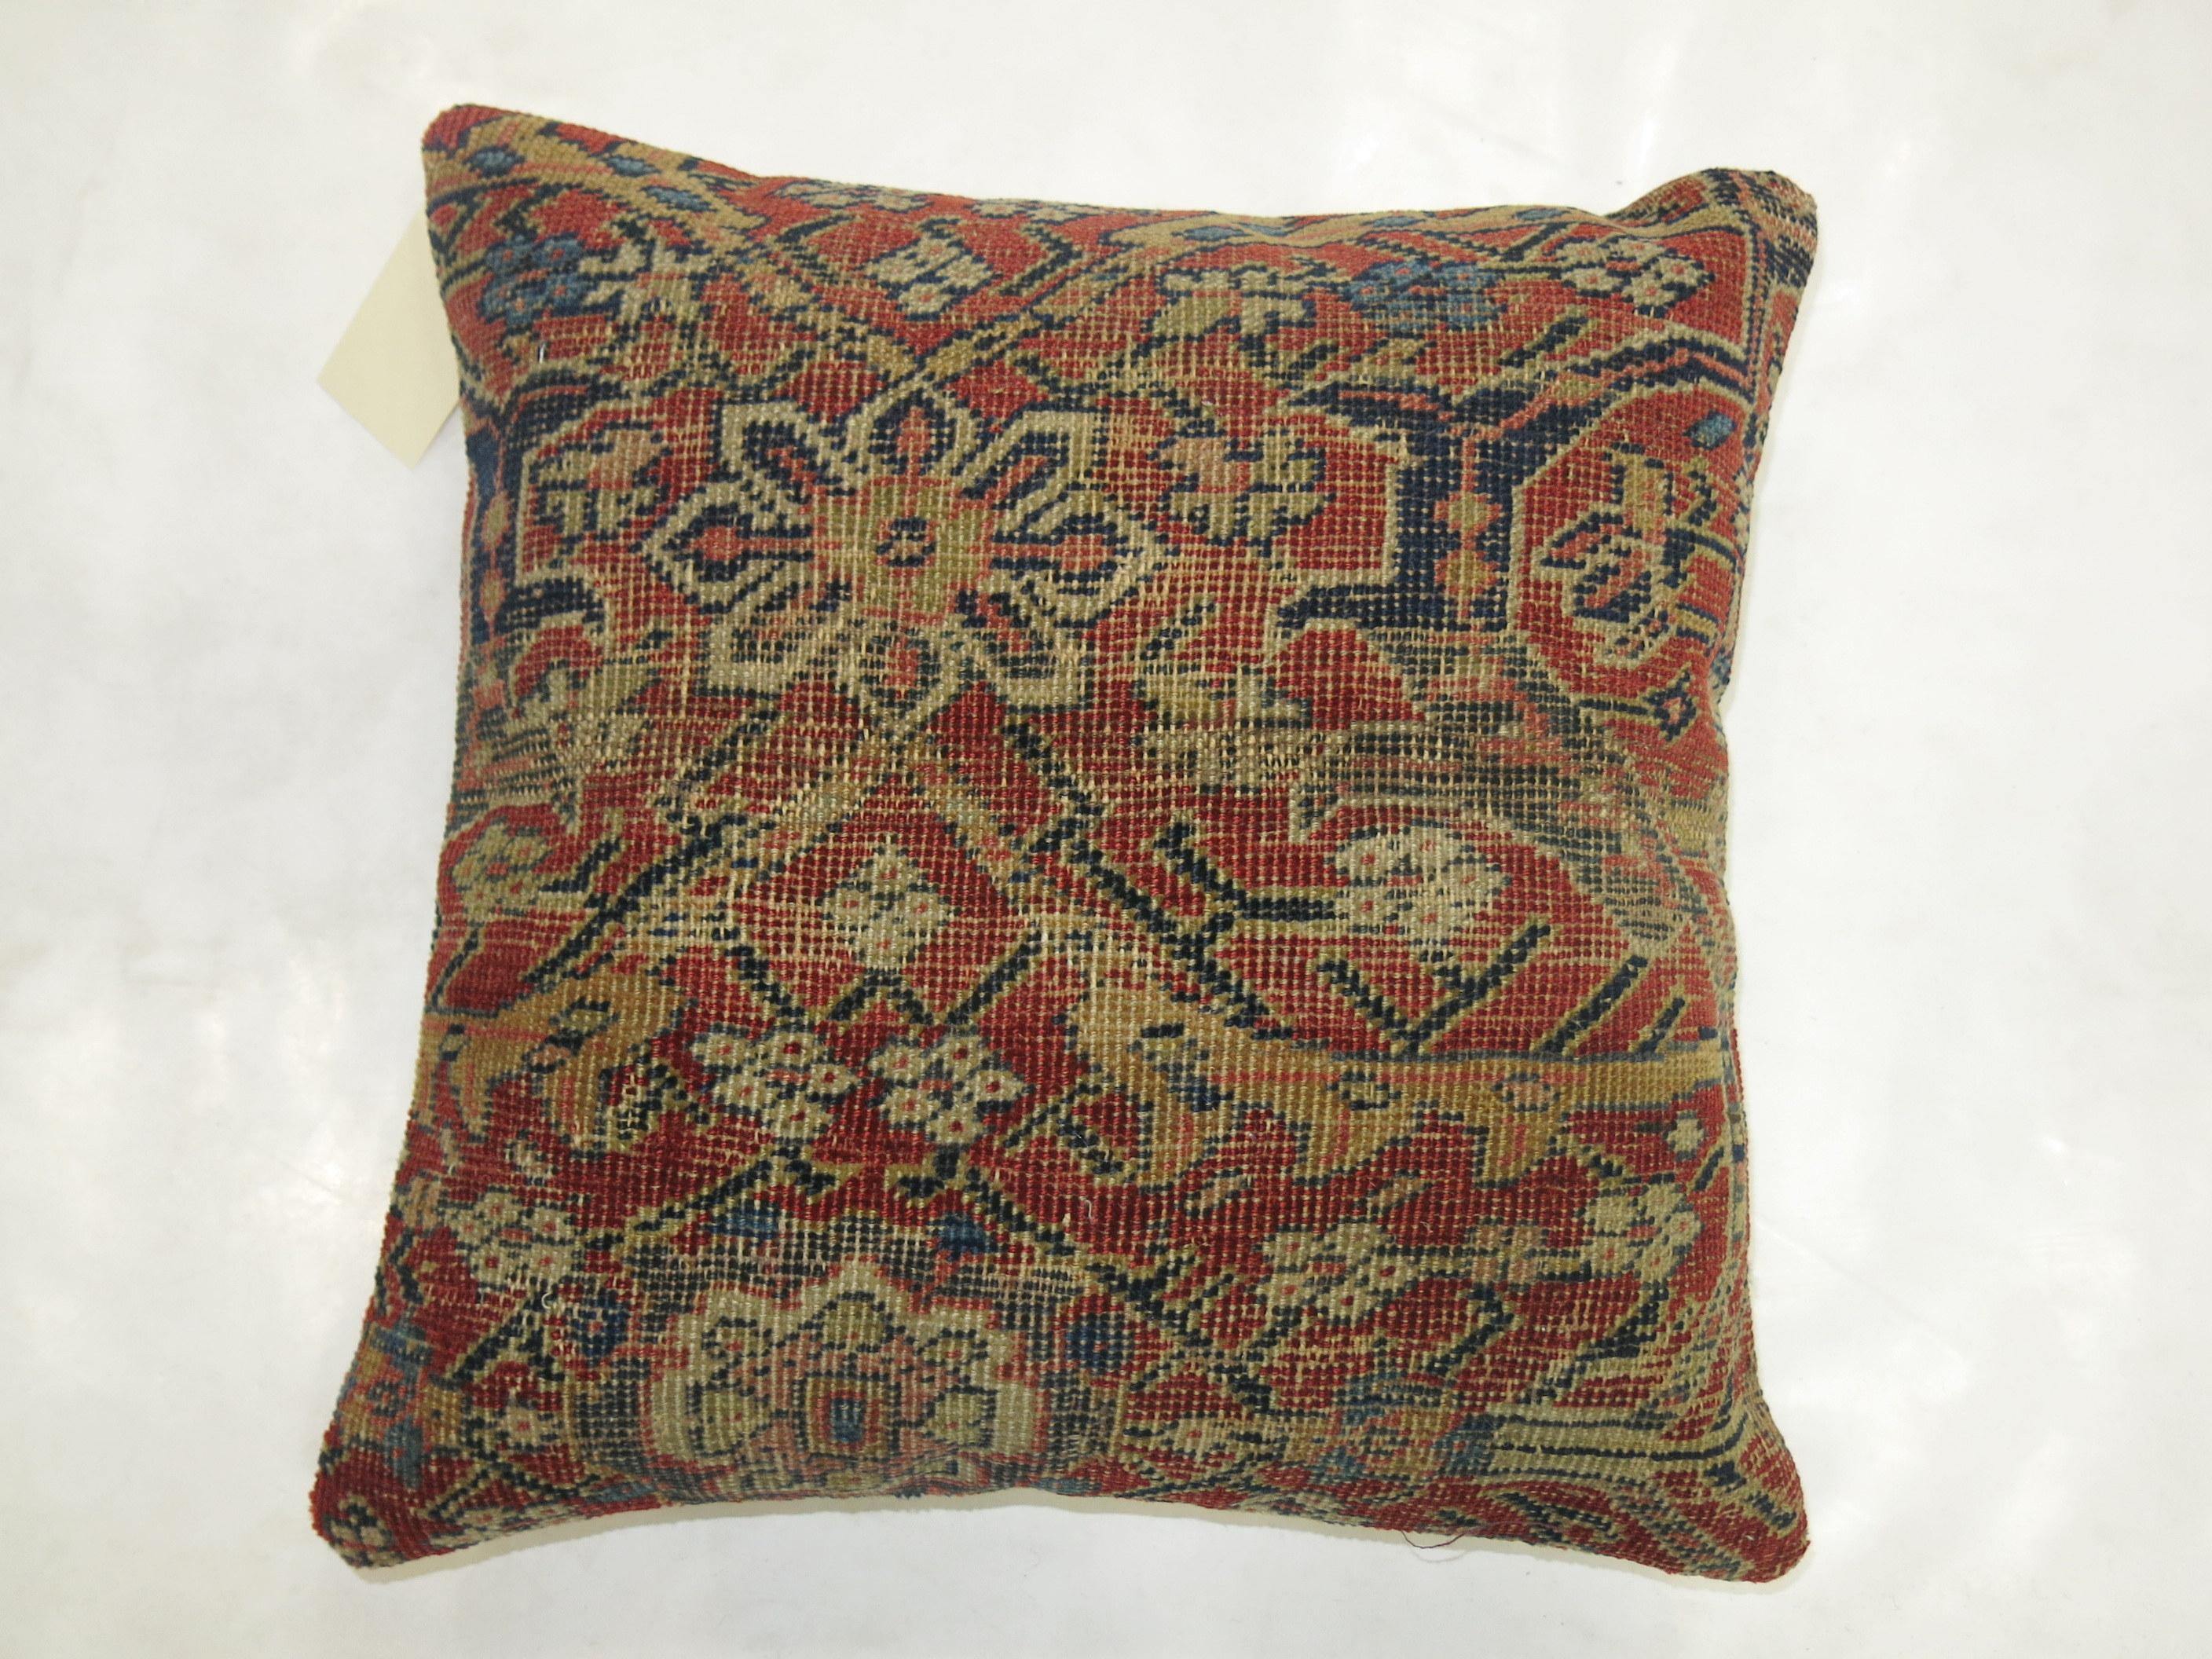 Pillow made from a Persian Mahal rug.

Measures: 17” x 18”.